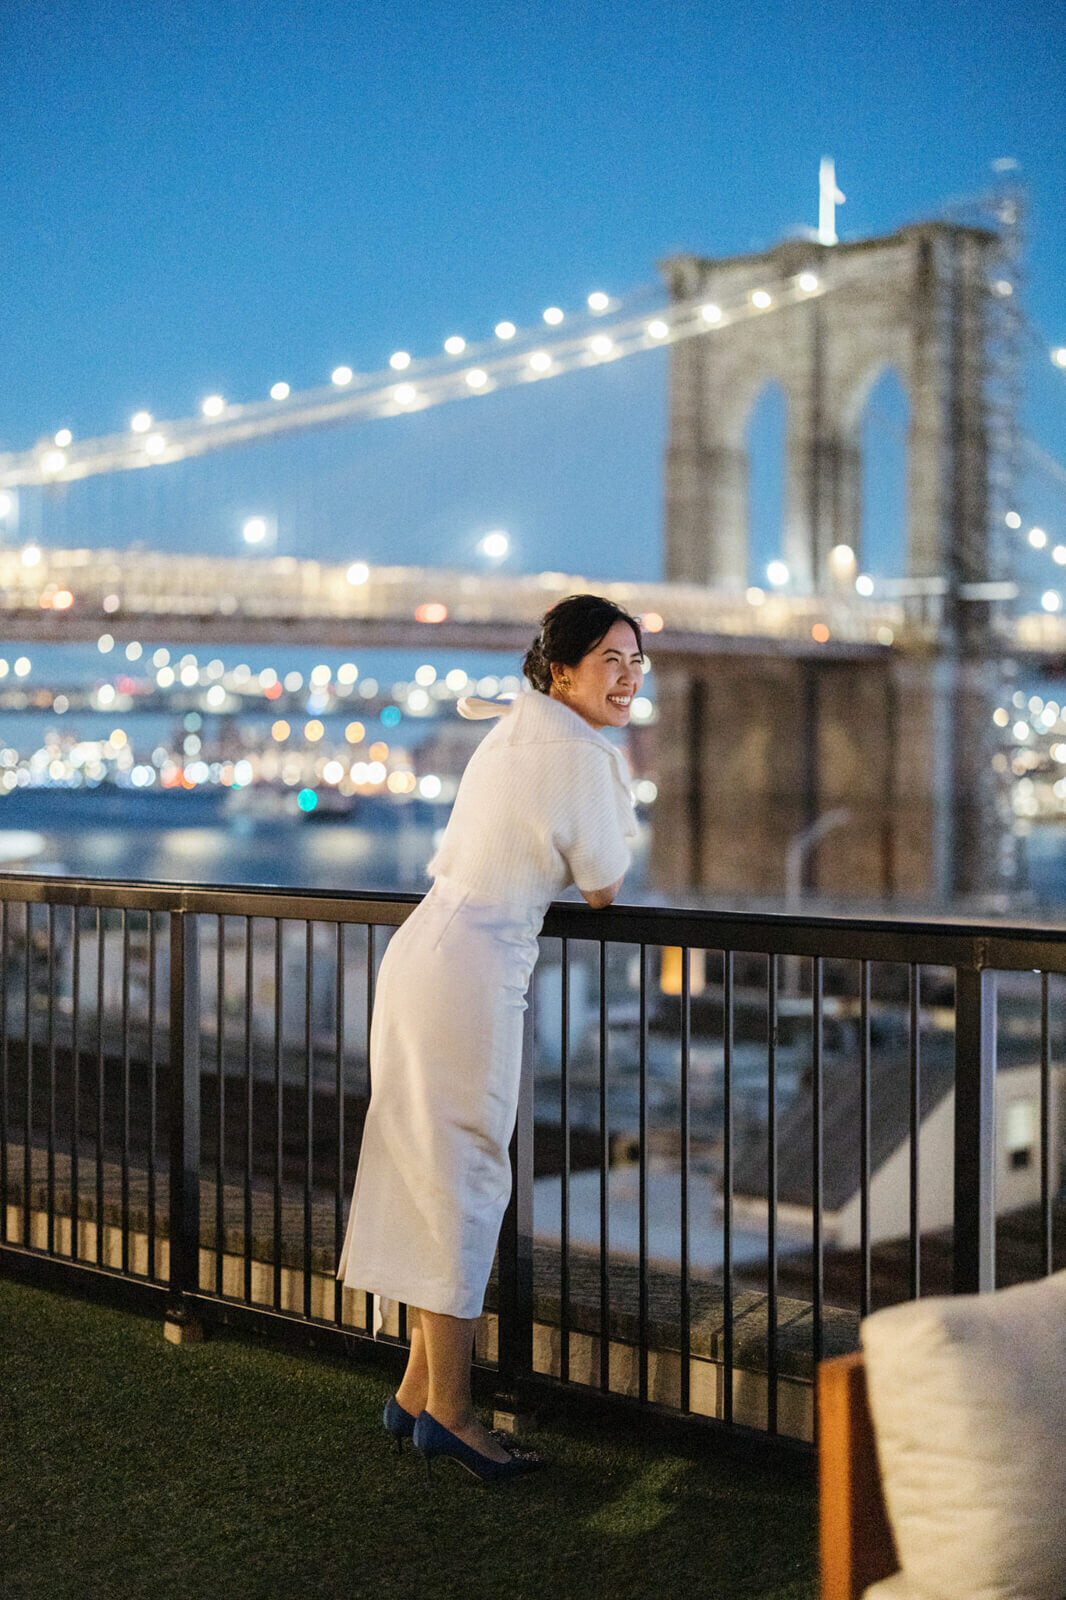 Side view of the smiling bride, leaning over a veranda railing, overlooking the Brooklyn Bridge in the night.